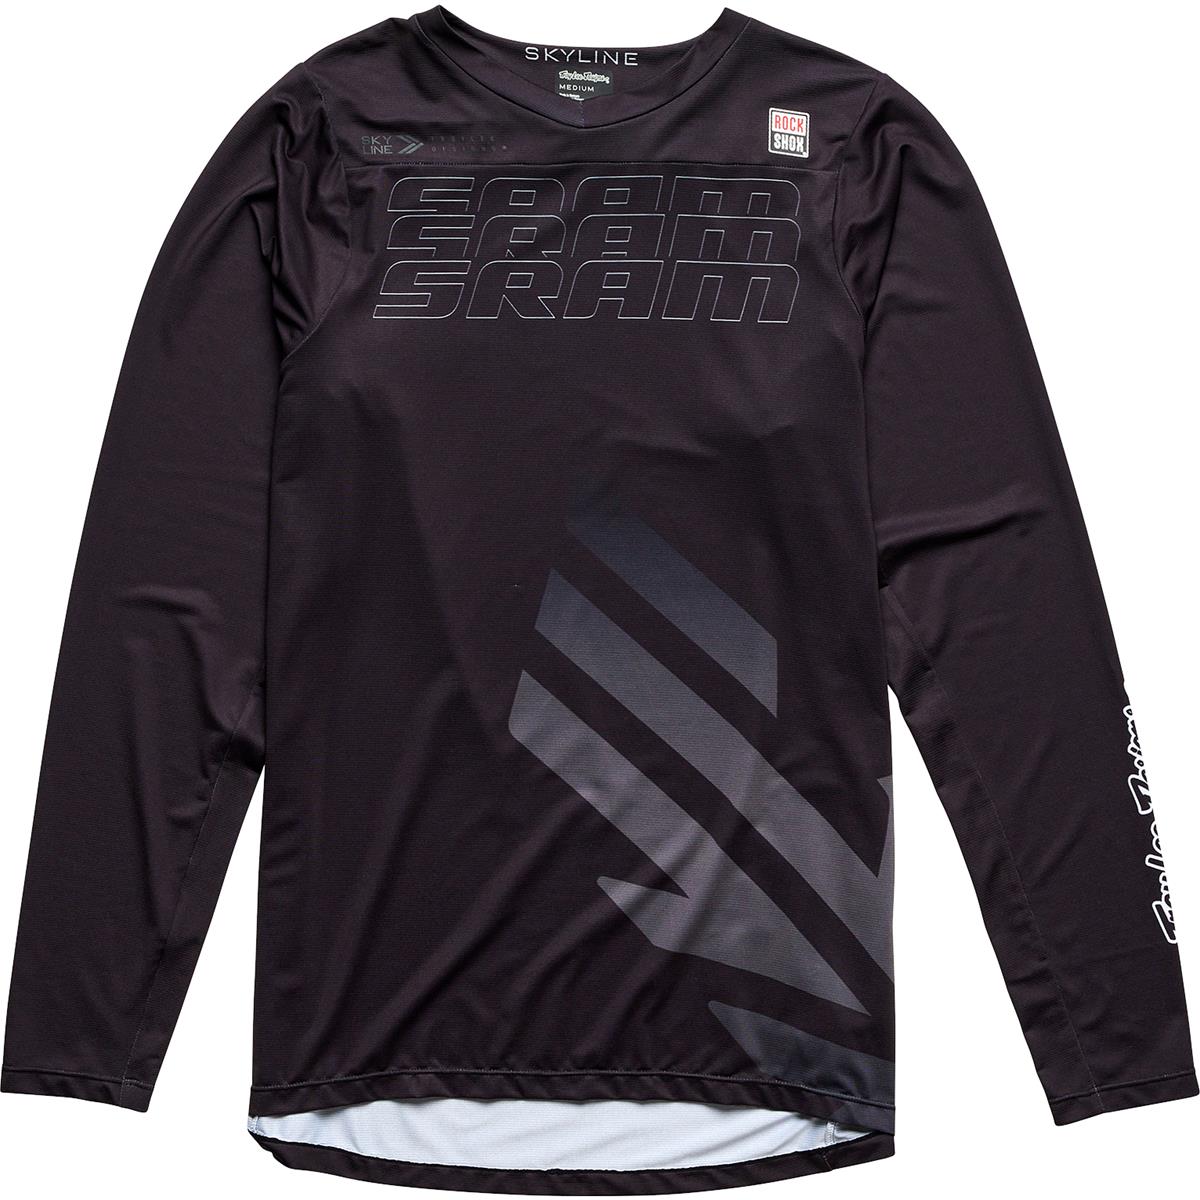 Troy Lee Designs Maillot VTT manches longues Skyline Sram - Eagle One Black